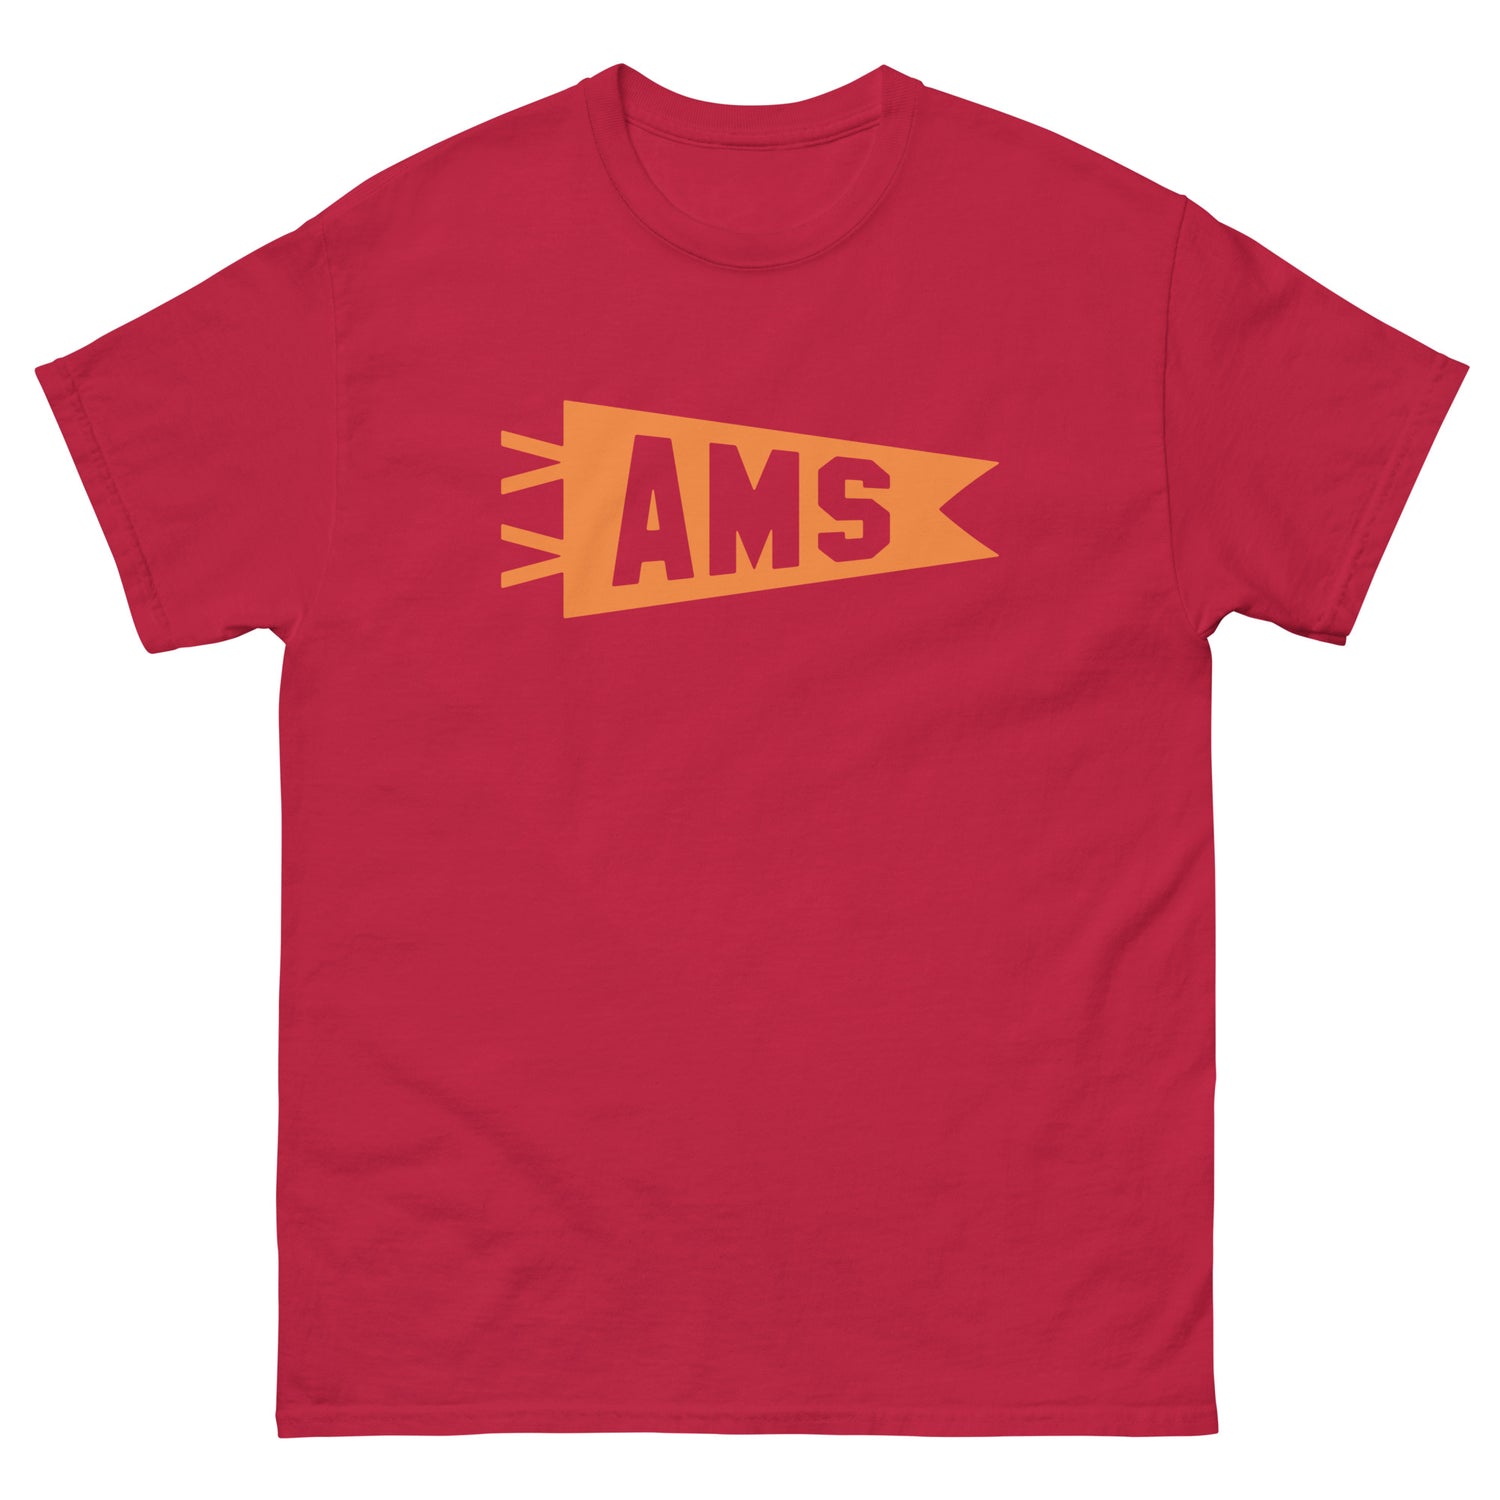 Amsterdam Netherlands Adult T-Shirts • AMS Airport Code